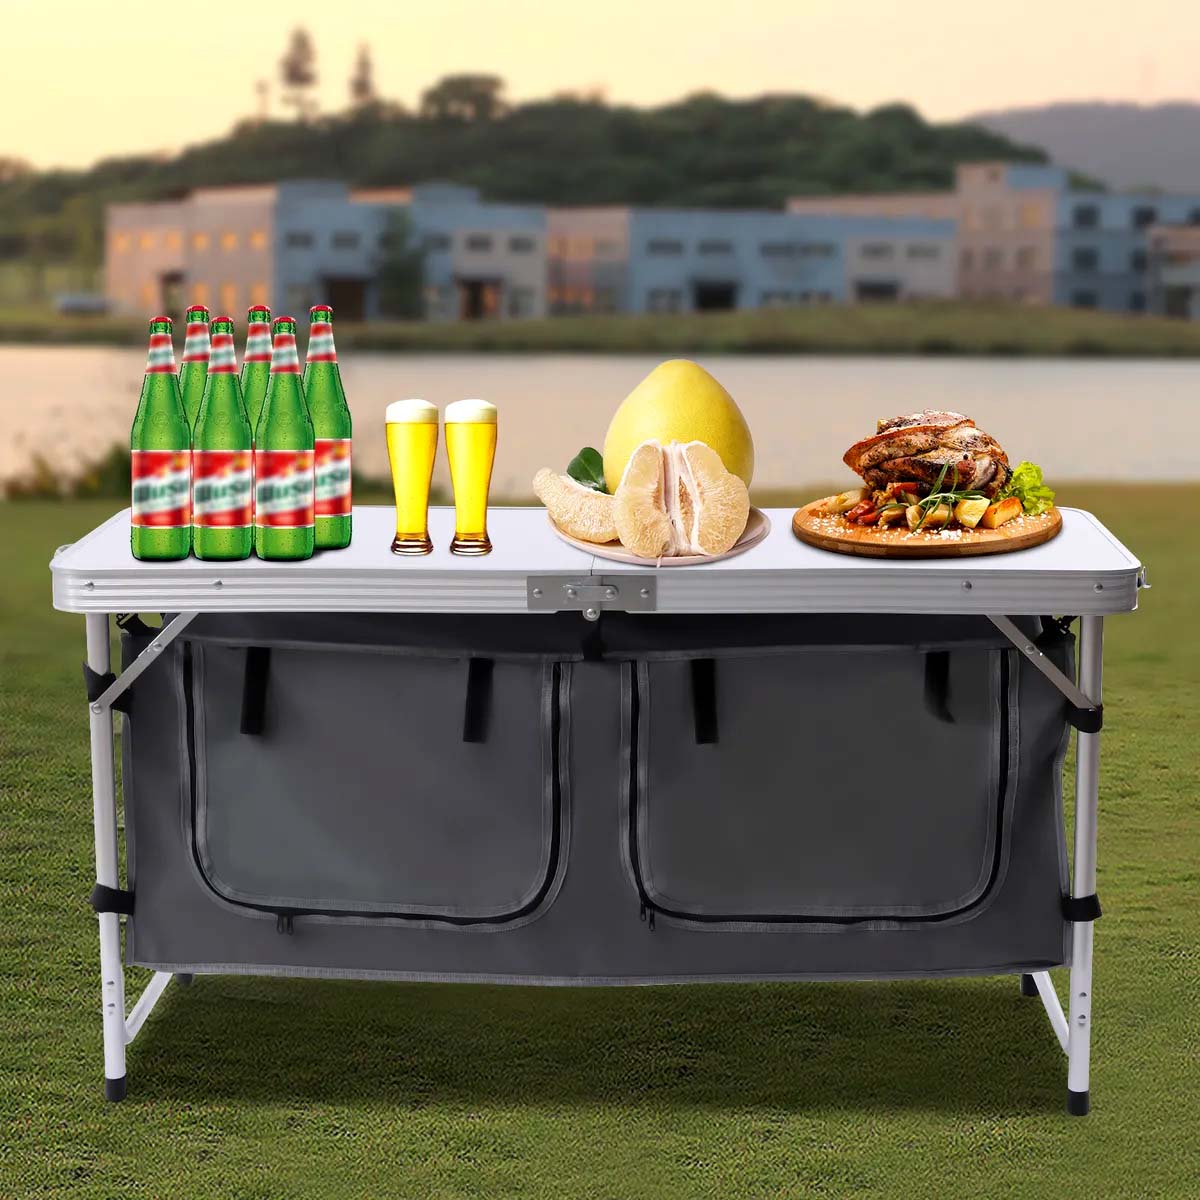 COSTWAY Folding Picnic Table, Portable 4ft Roll Up Camping Table with  Storage Bag, for 4-6 People, Low Height Foldable Bamboo Bench Table, for  Indoor